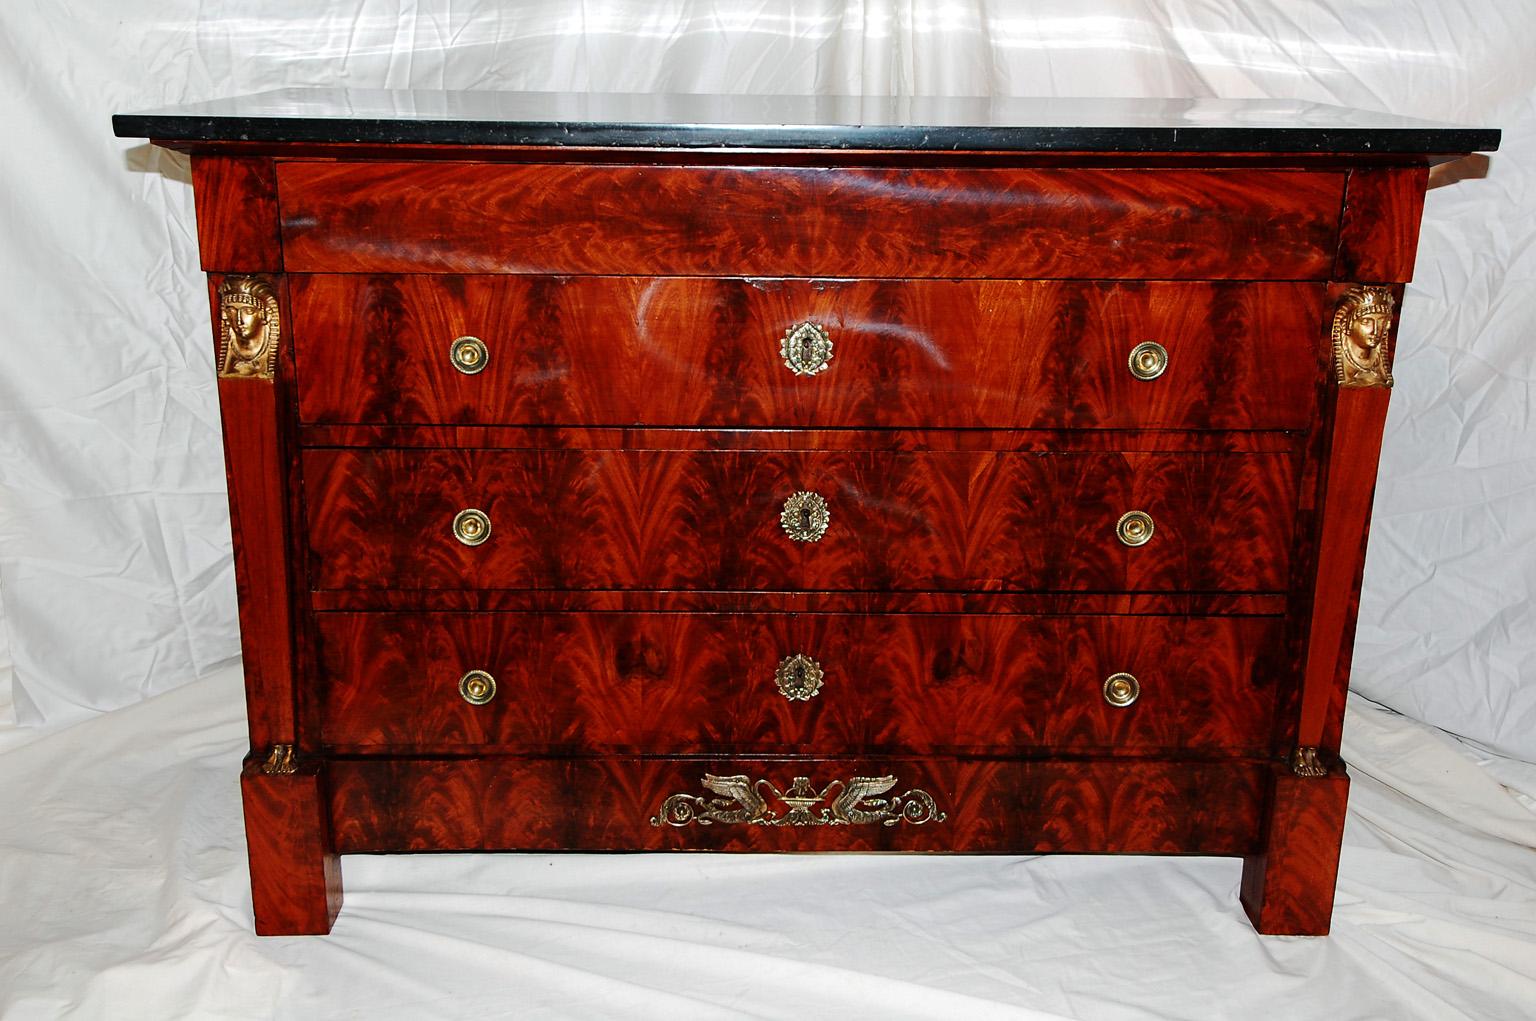 French Empire period commode (chest) in matched flame grain mahogany, Egyptian caryatid columns with ormolu head and feet, swan ormolu mount to lower frieze, laurel leaf escutcheons and round pulls. This handsome chest retains its original separate